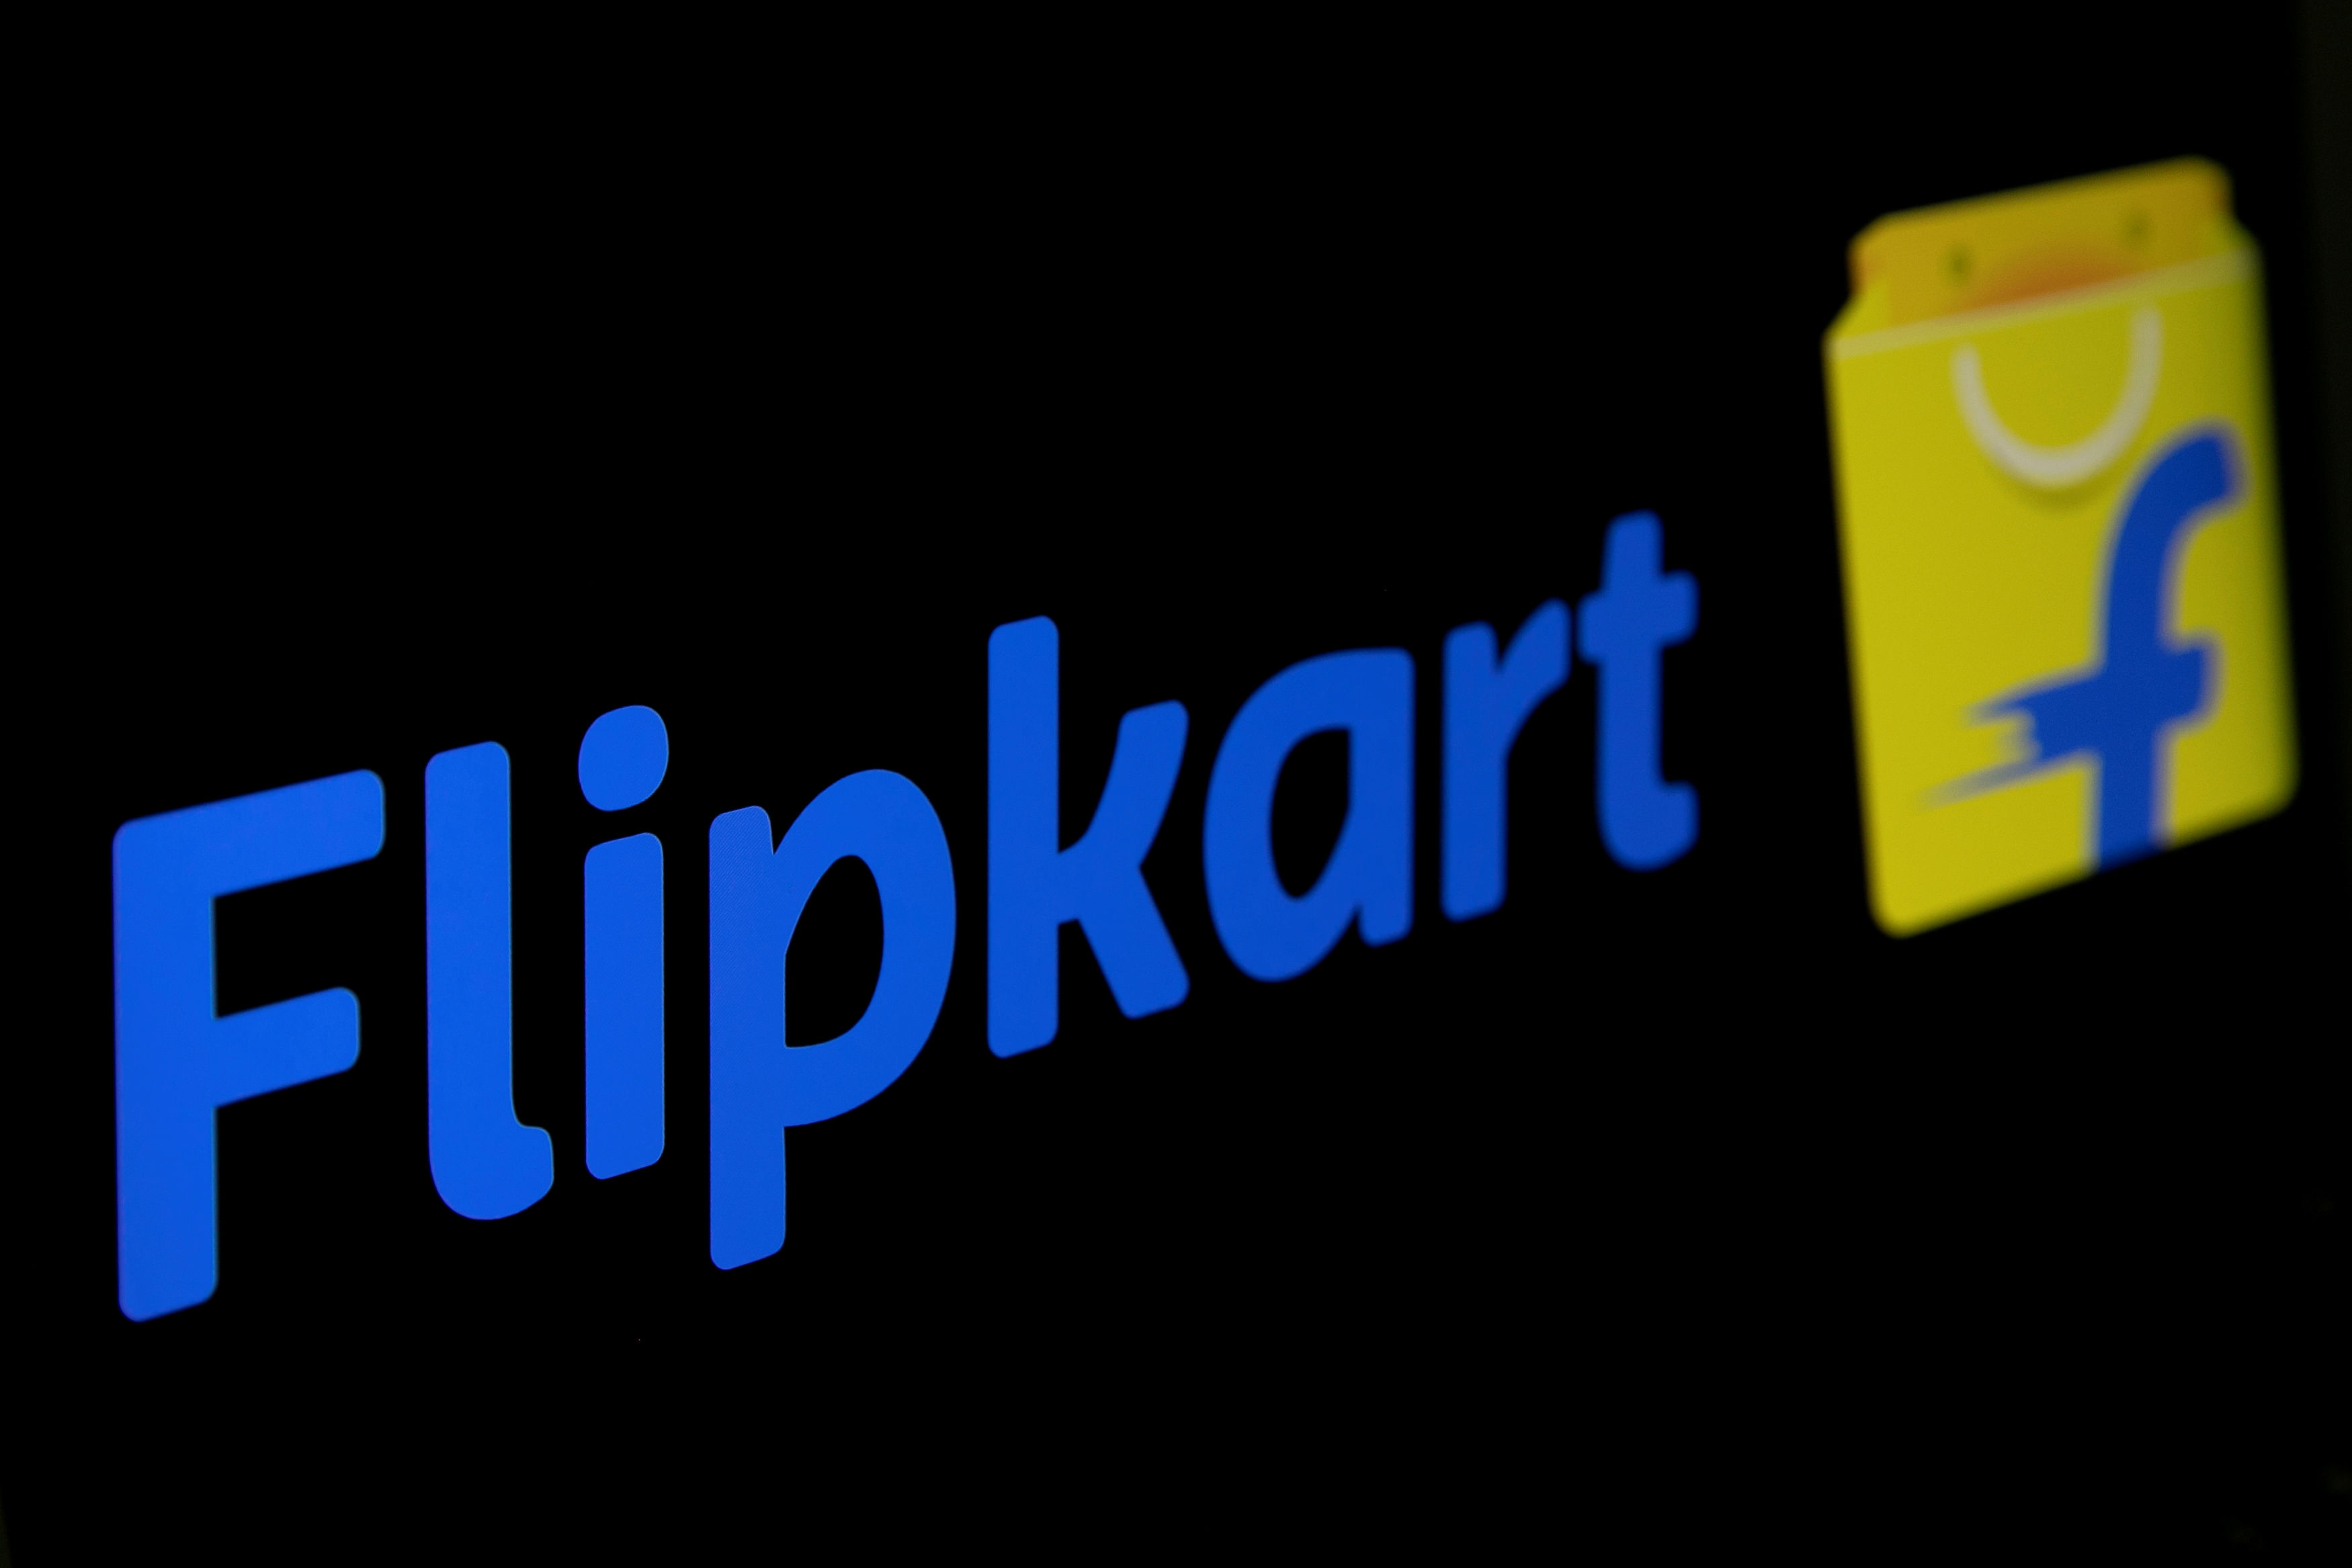 Flipkart said by enabling consumers to enjoy a hassle-free and safe payment process for transactions up to Rs 2,000, it hopes to reduce the steps in the payment system. (Reuters Photo)